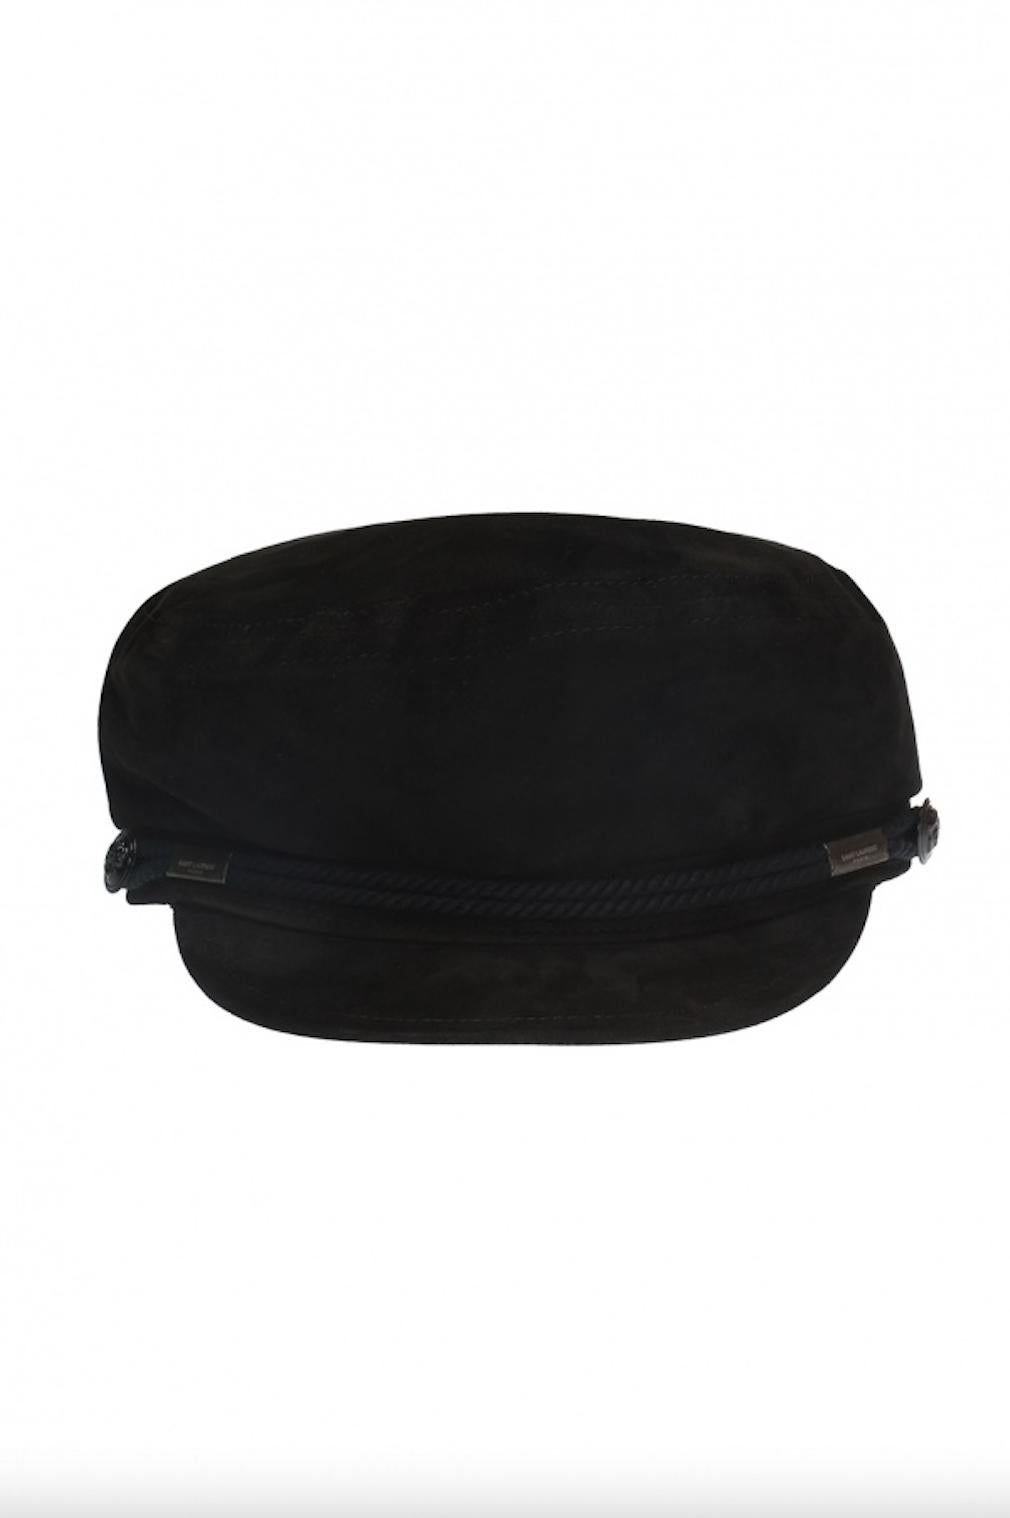 Saint Laurent Black Suede Sailor Cap Hat

With a legacy built on luxurious hedonism, Parisian fashion house Saint Laurent exudes the seditious spirit of the times through classically tailored silhouettes and classic leatherwares. A prime example is